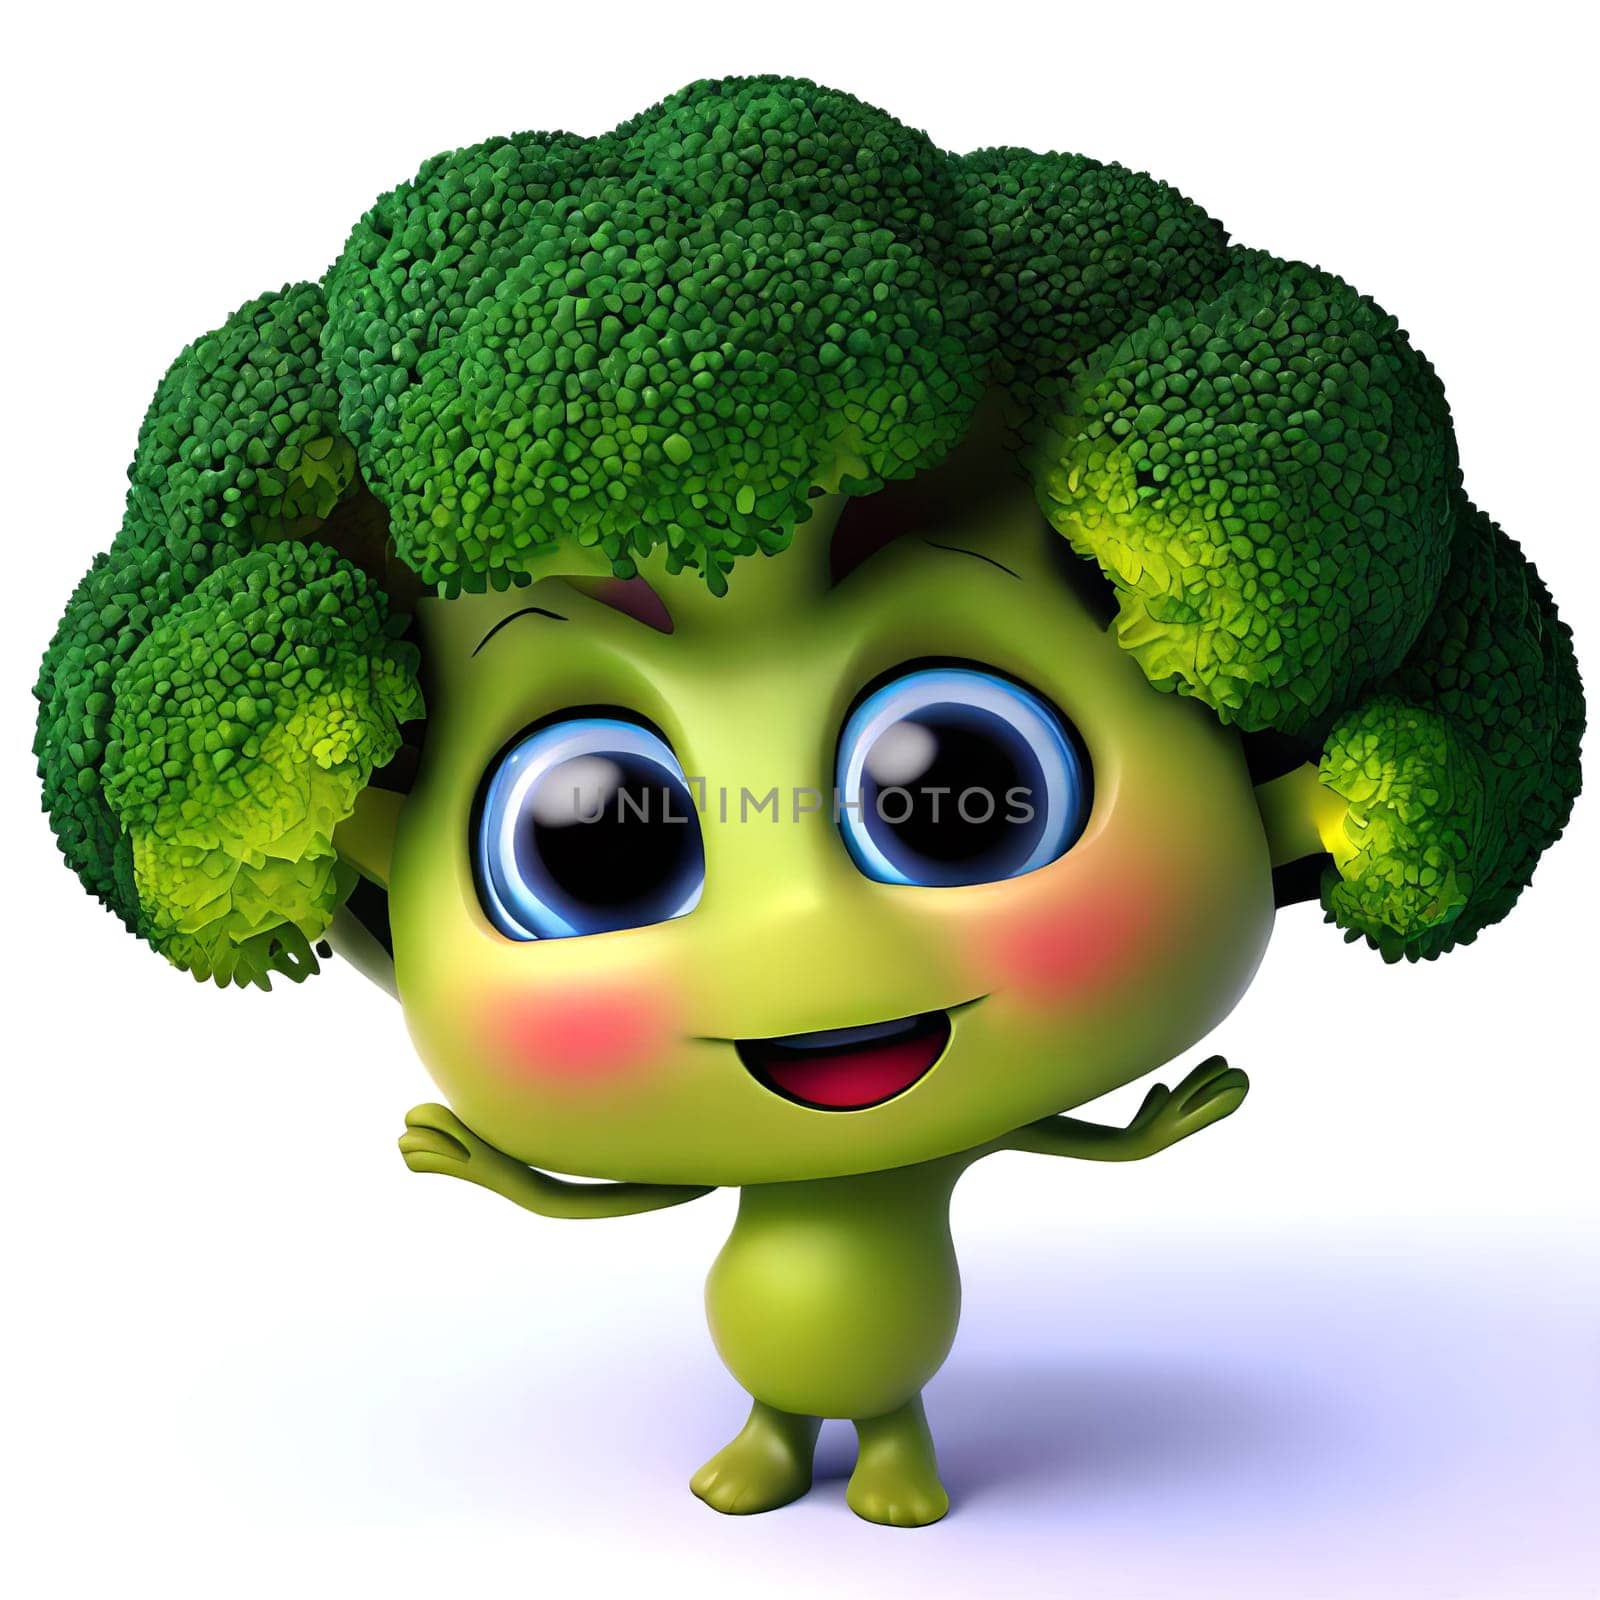 Cute cartoon 3d character of smiling broccoli by clusterx